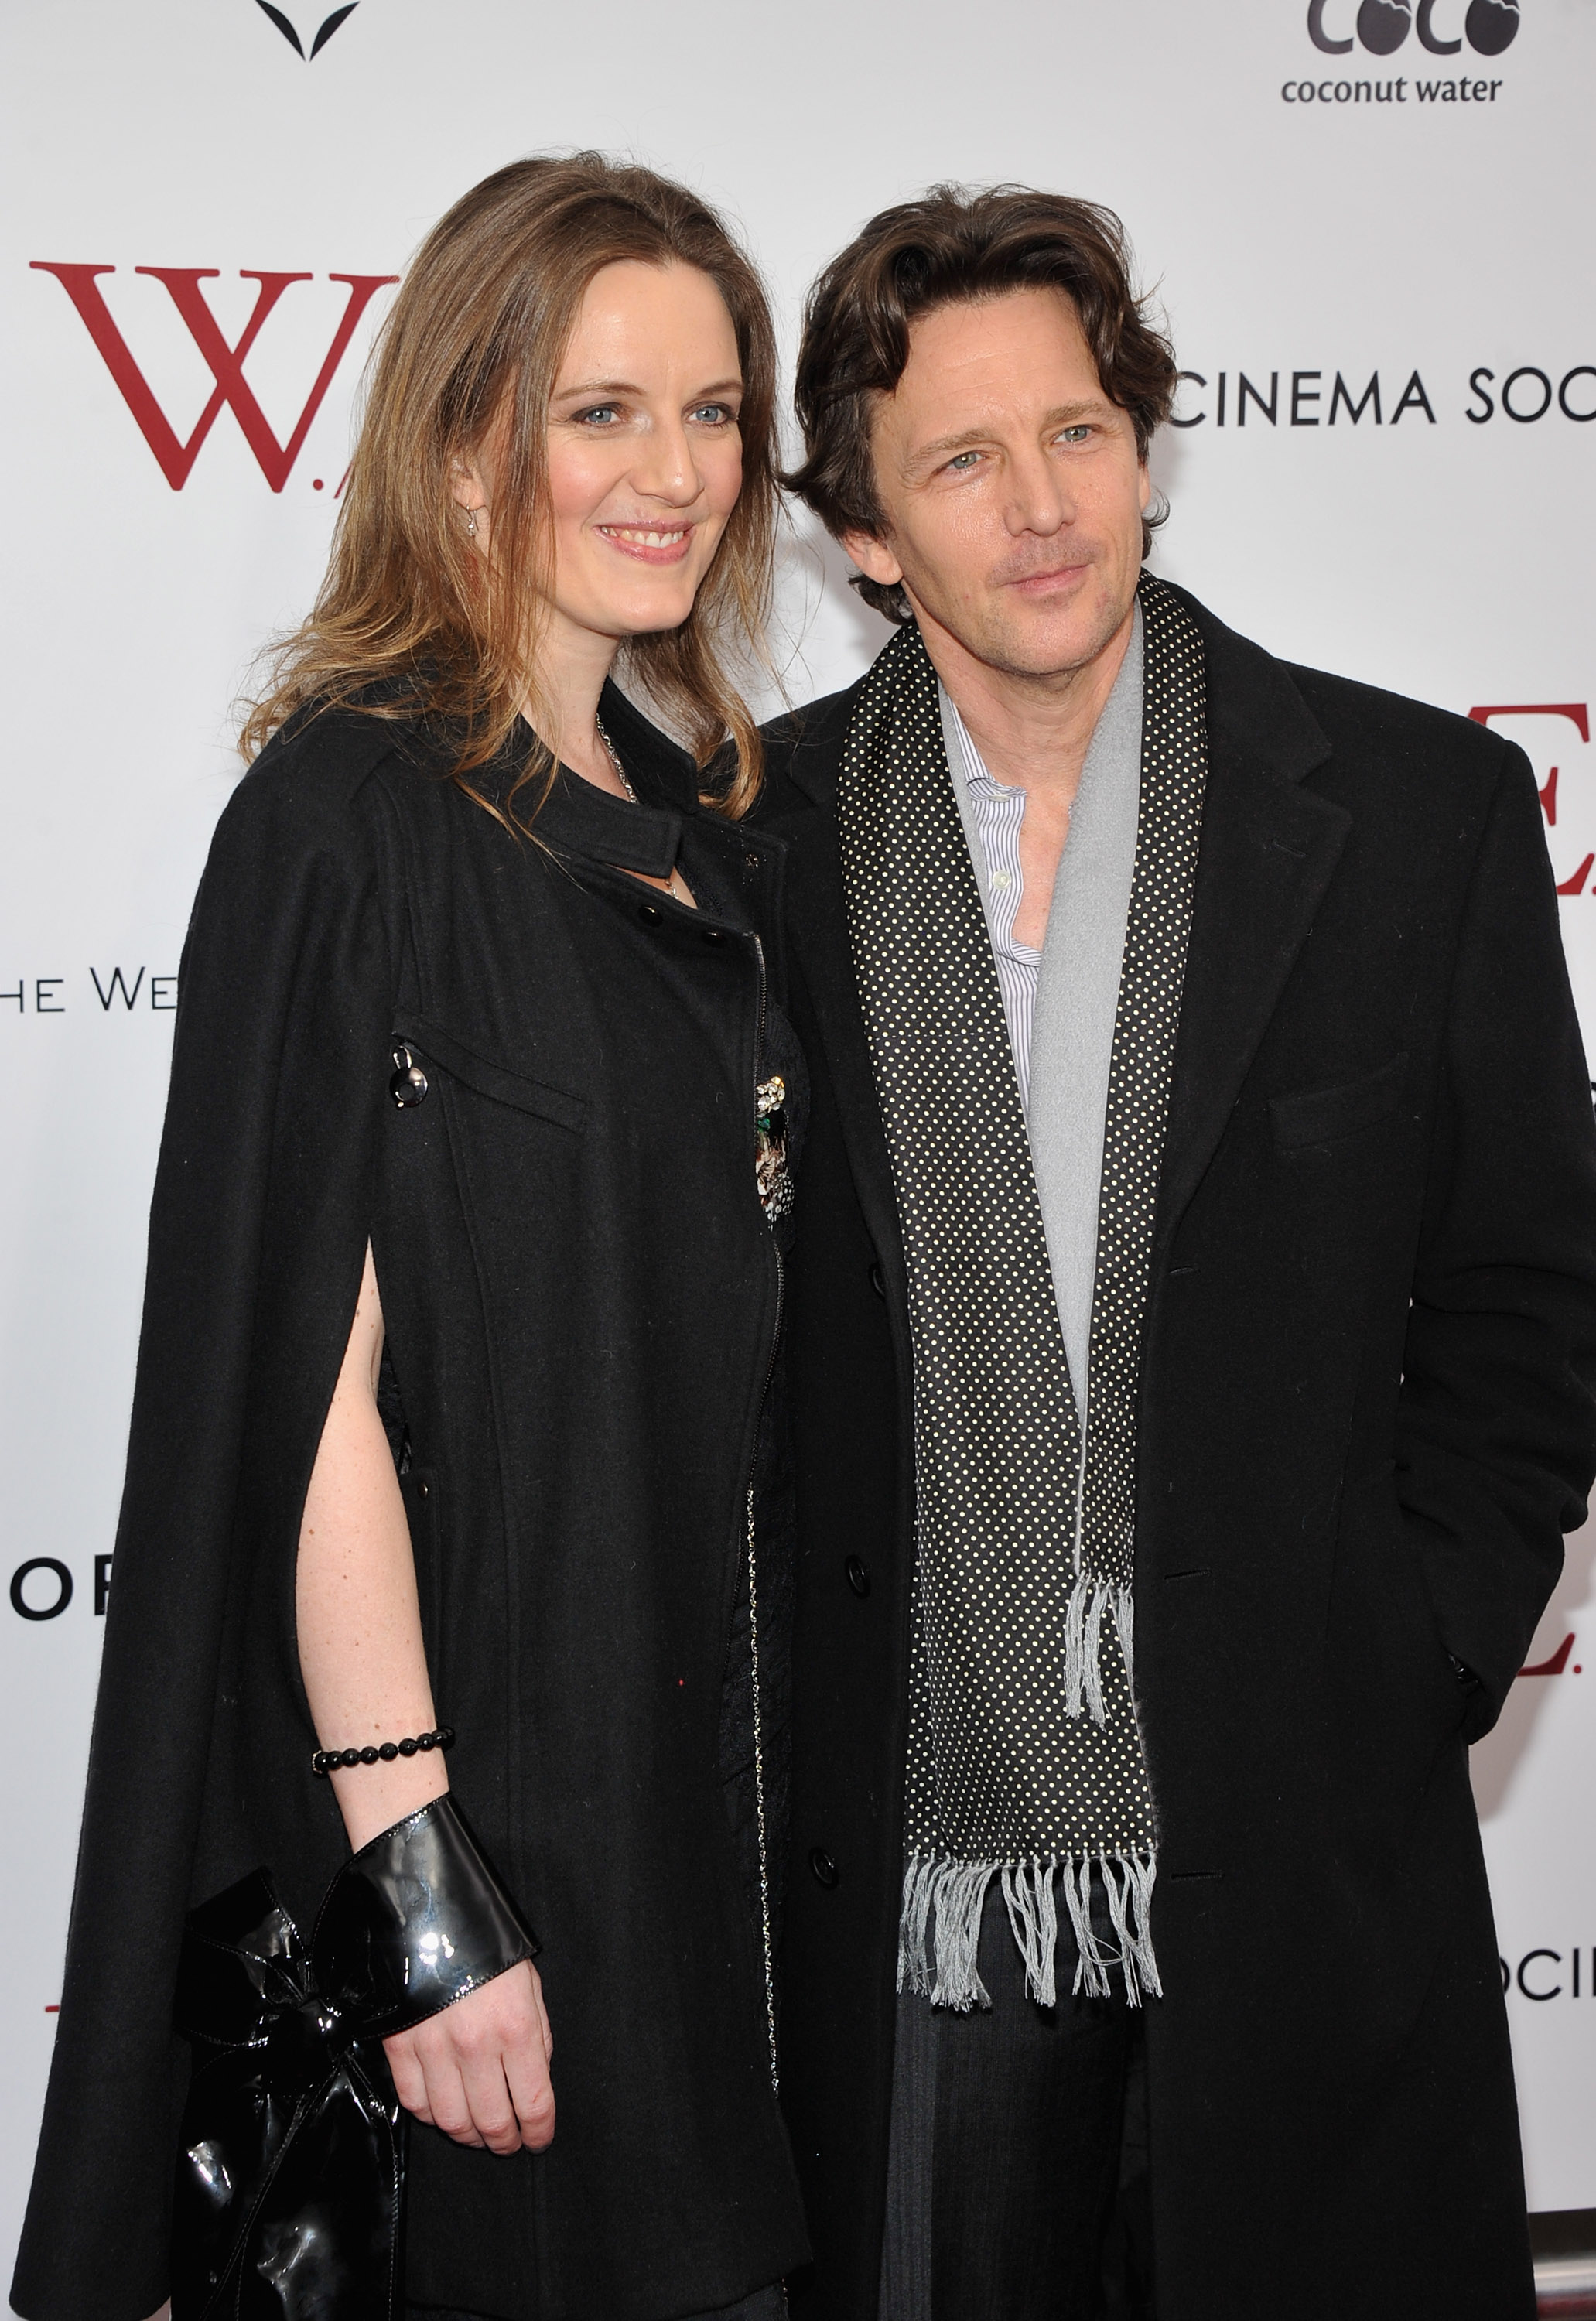 Dolores Rice and Andrew McCarthy at The Weinstein Company with The Cinema Society & Forevermark premiere of "W.E." at the Ziegfeld Theater on January 23, 2012, in New York City. | Source: Getty Images